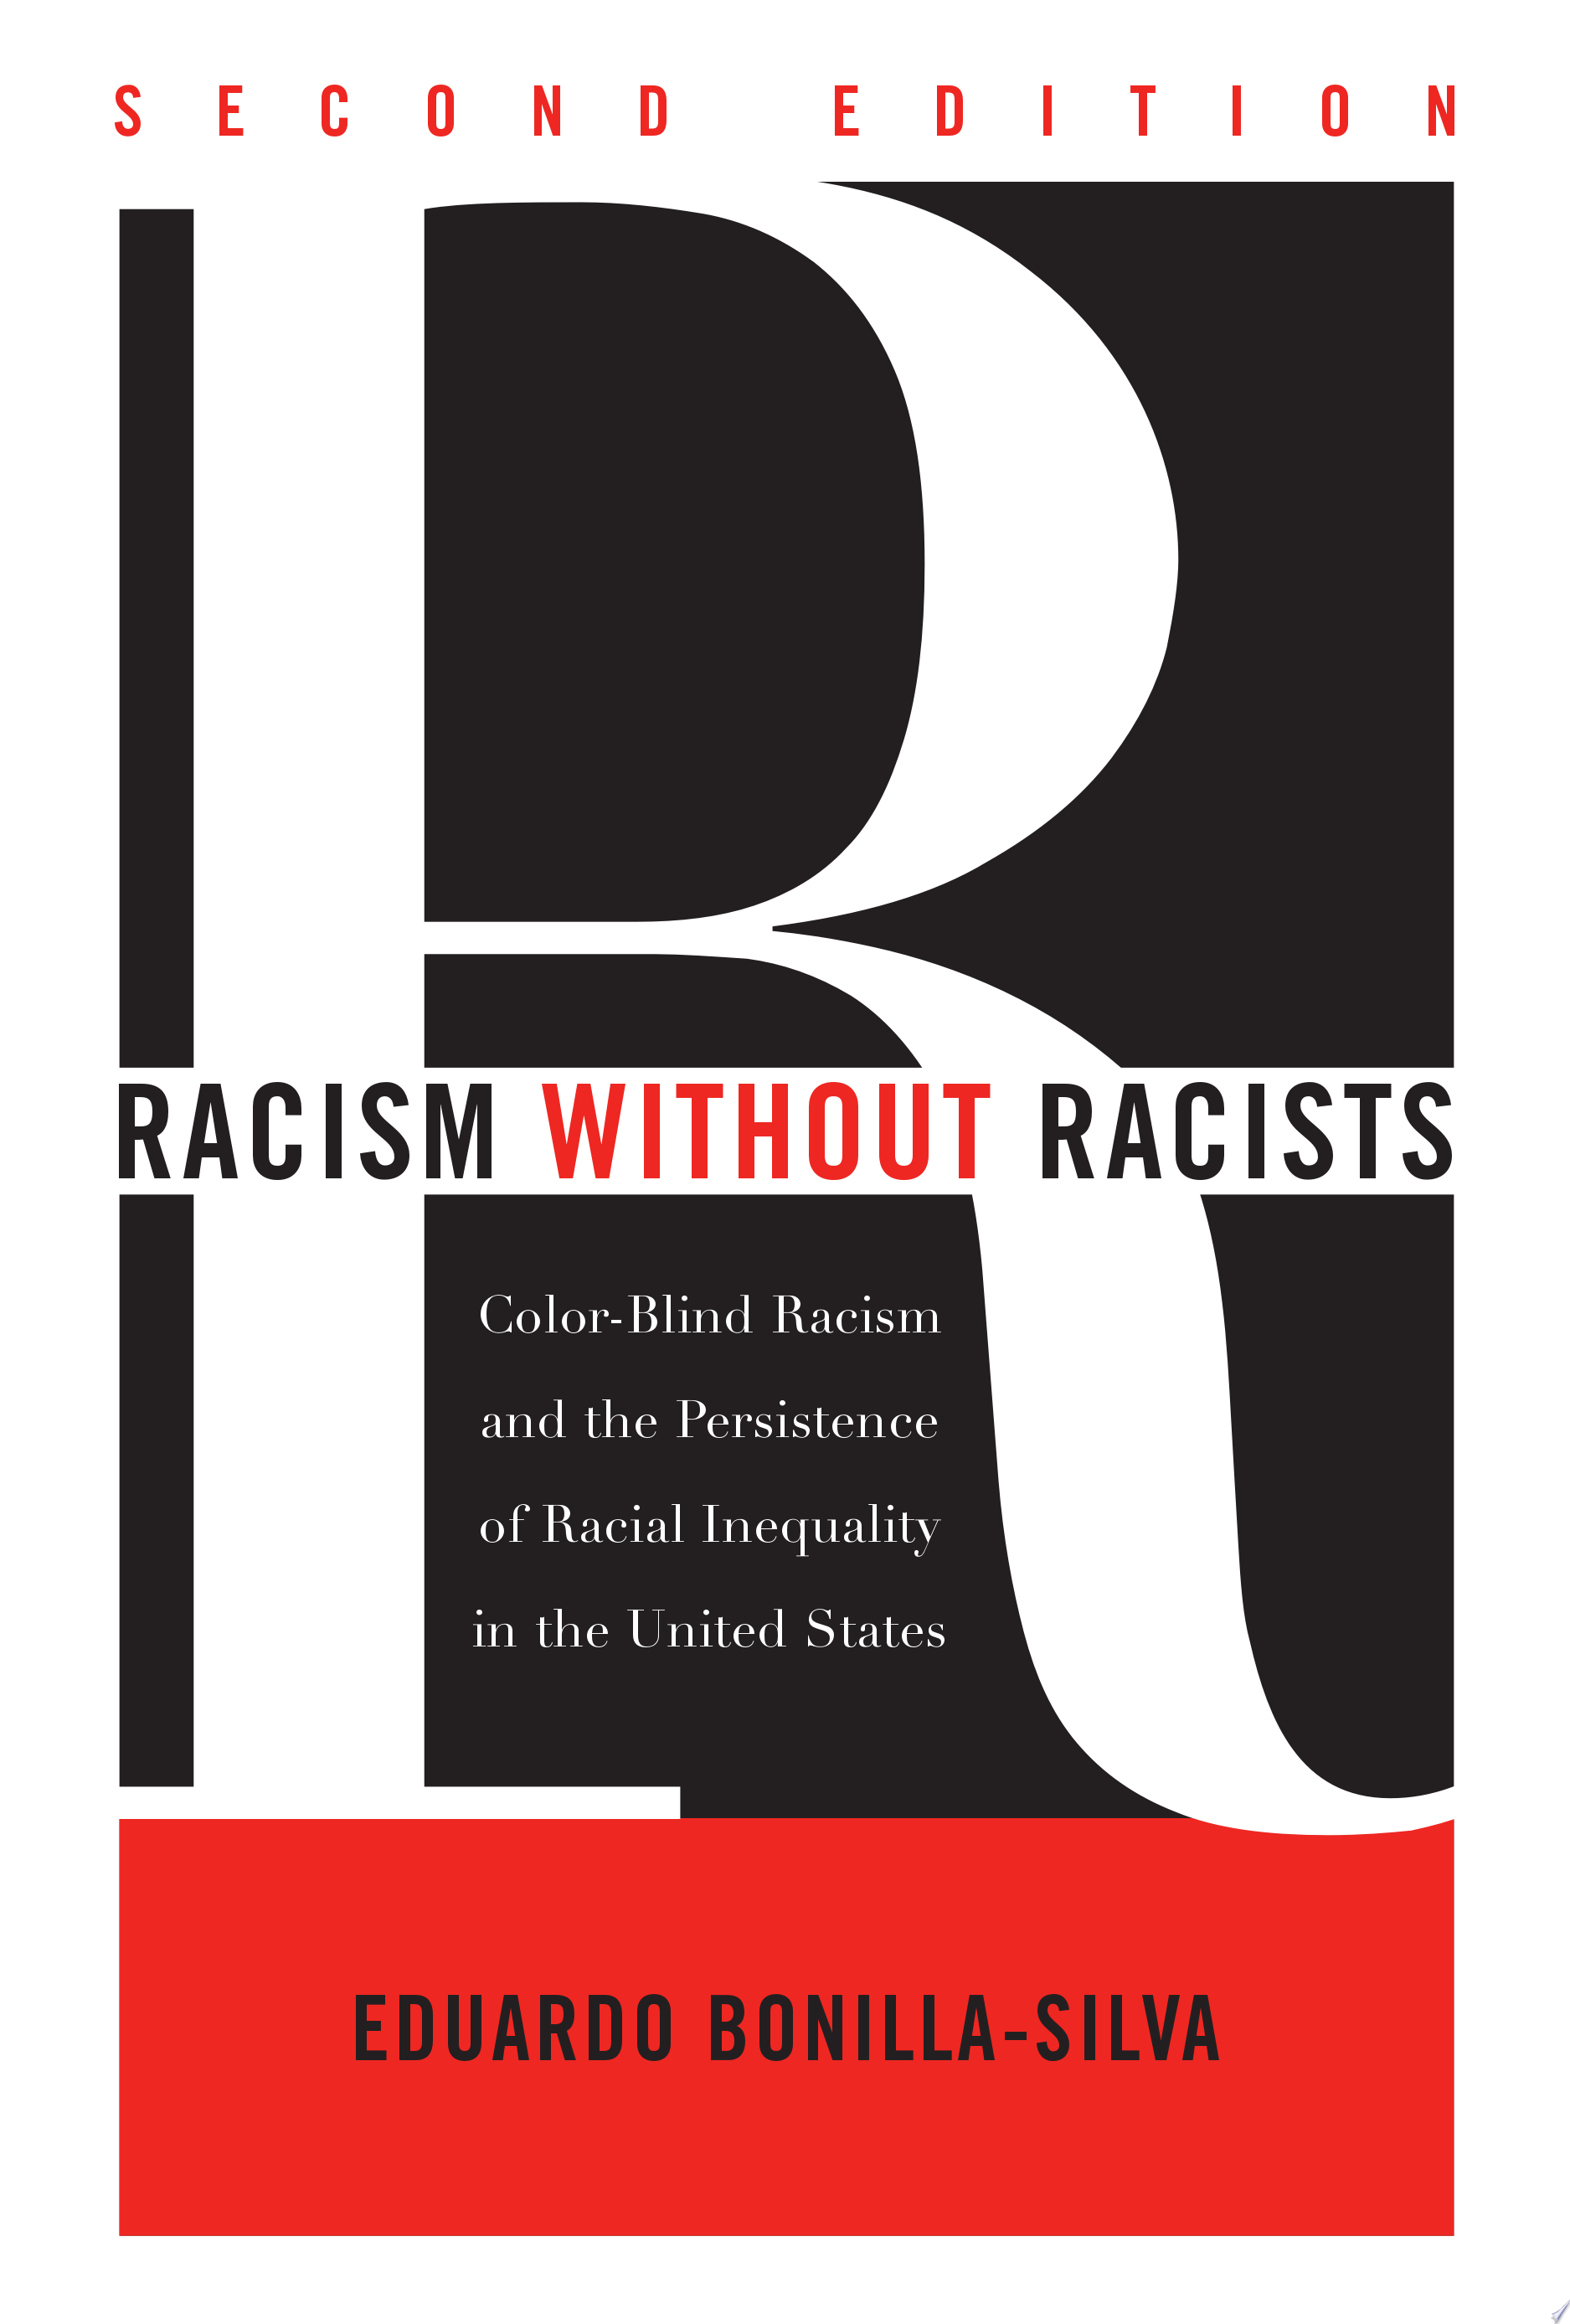 Image for "Racism without Racists"